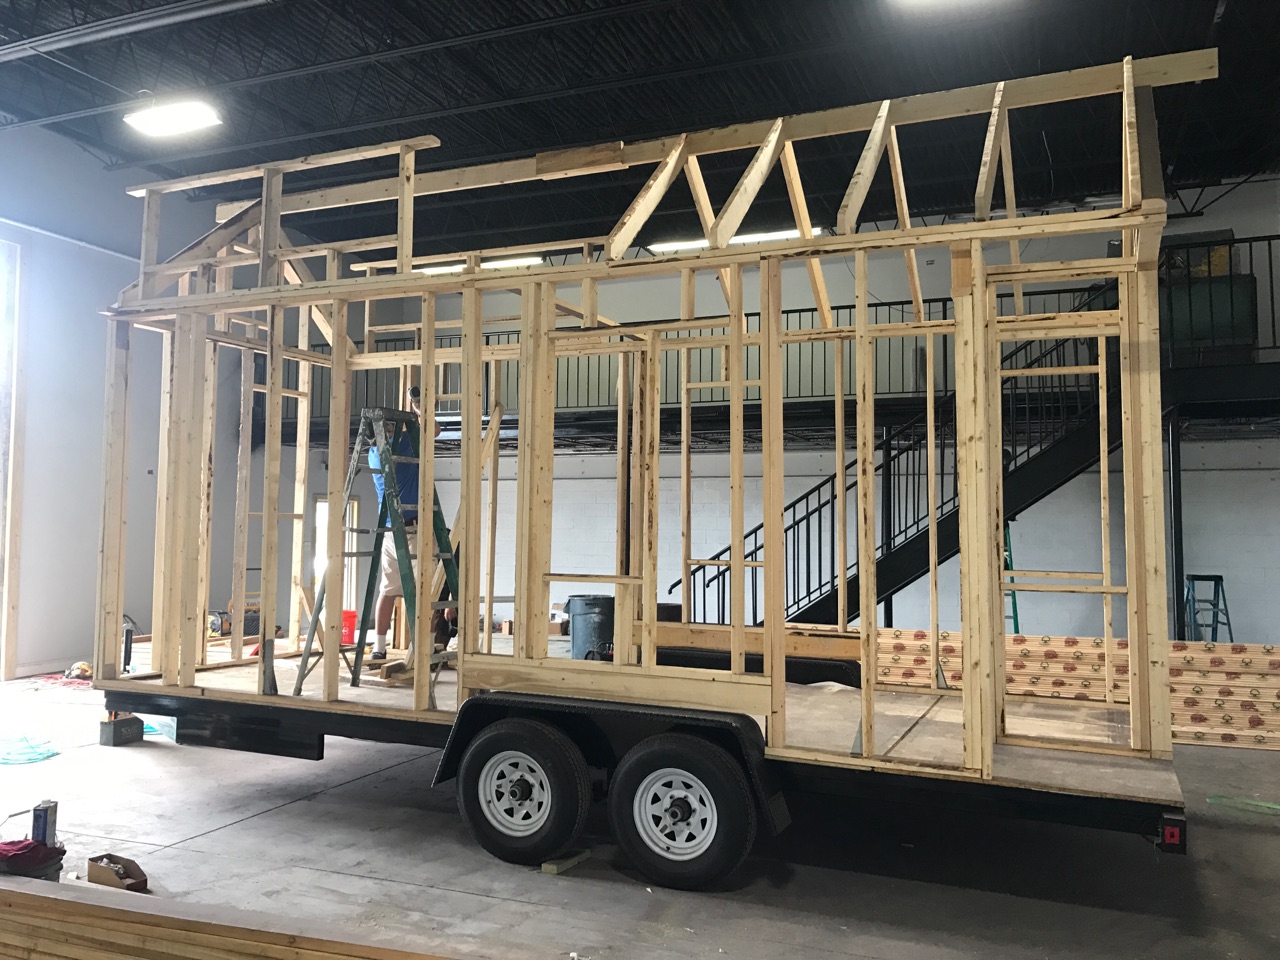 Latest on the 20ft Movable Tiny House Build